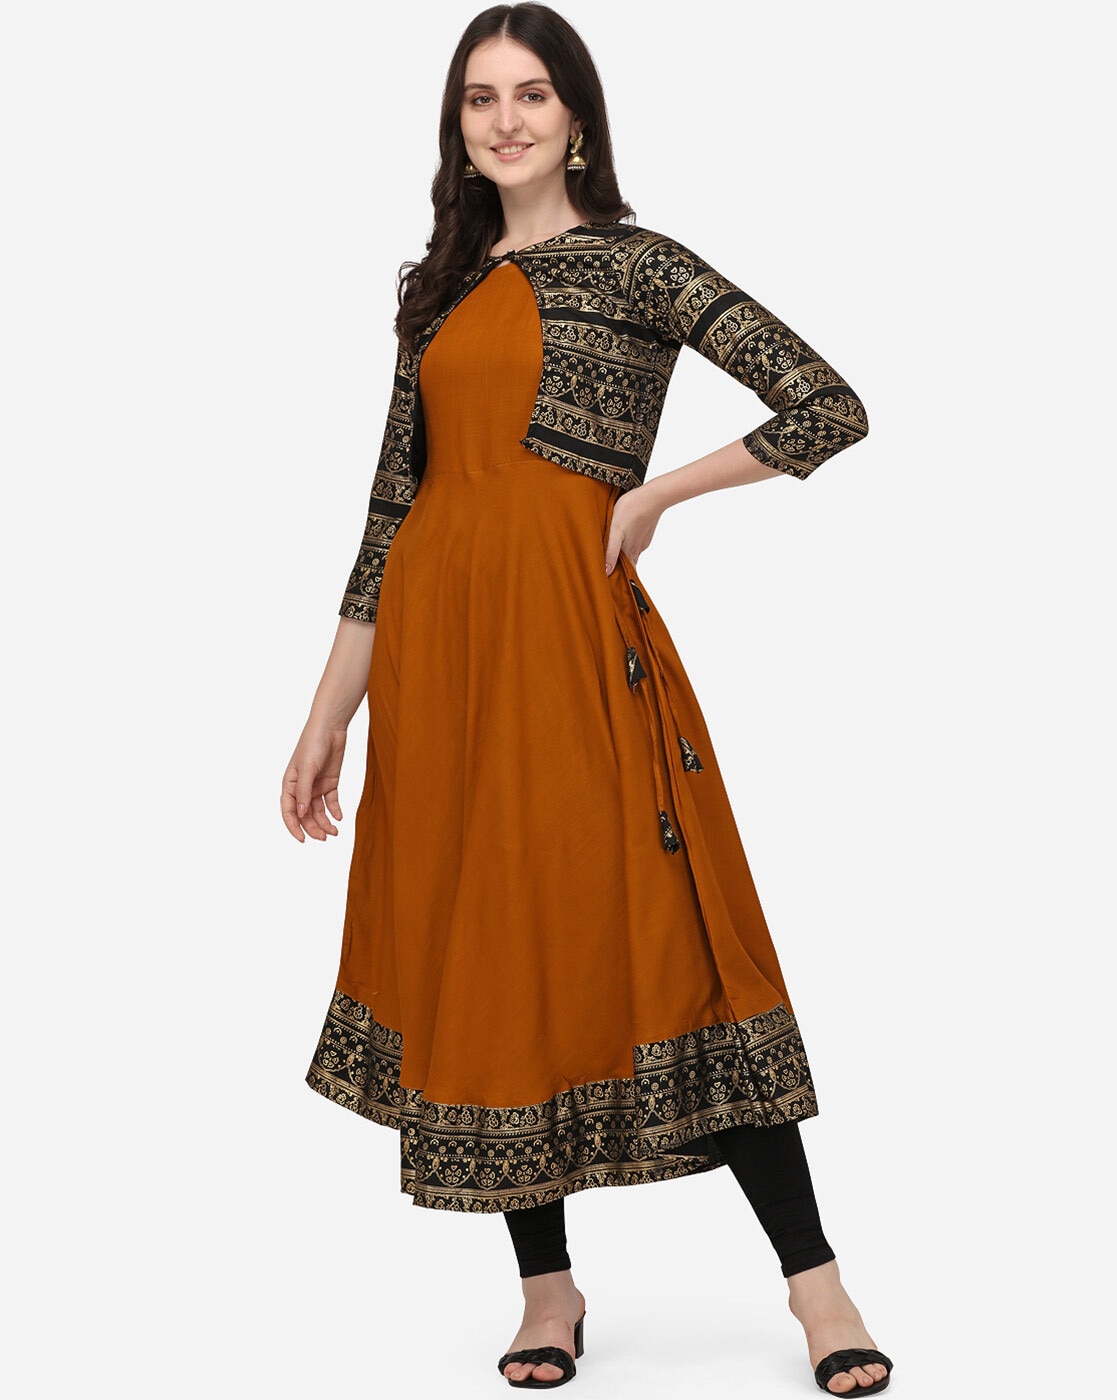 A-line sleeveless kurta paired with lace adorned jacket with churidar  sleeves having a front open tie-up detailed with tassels is ample for an  ethnic festive look.